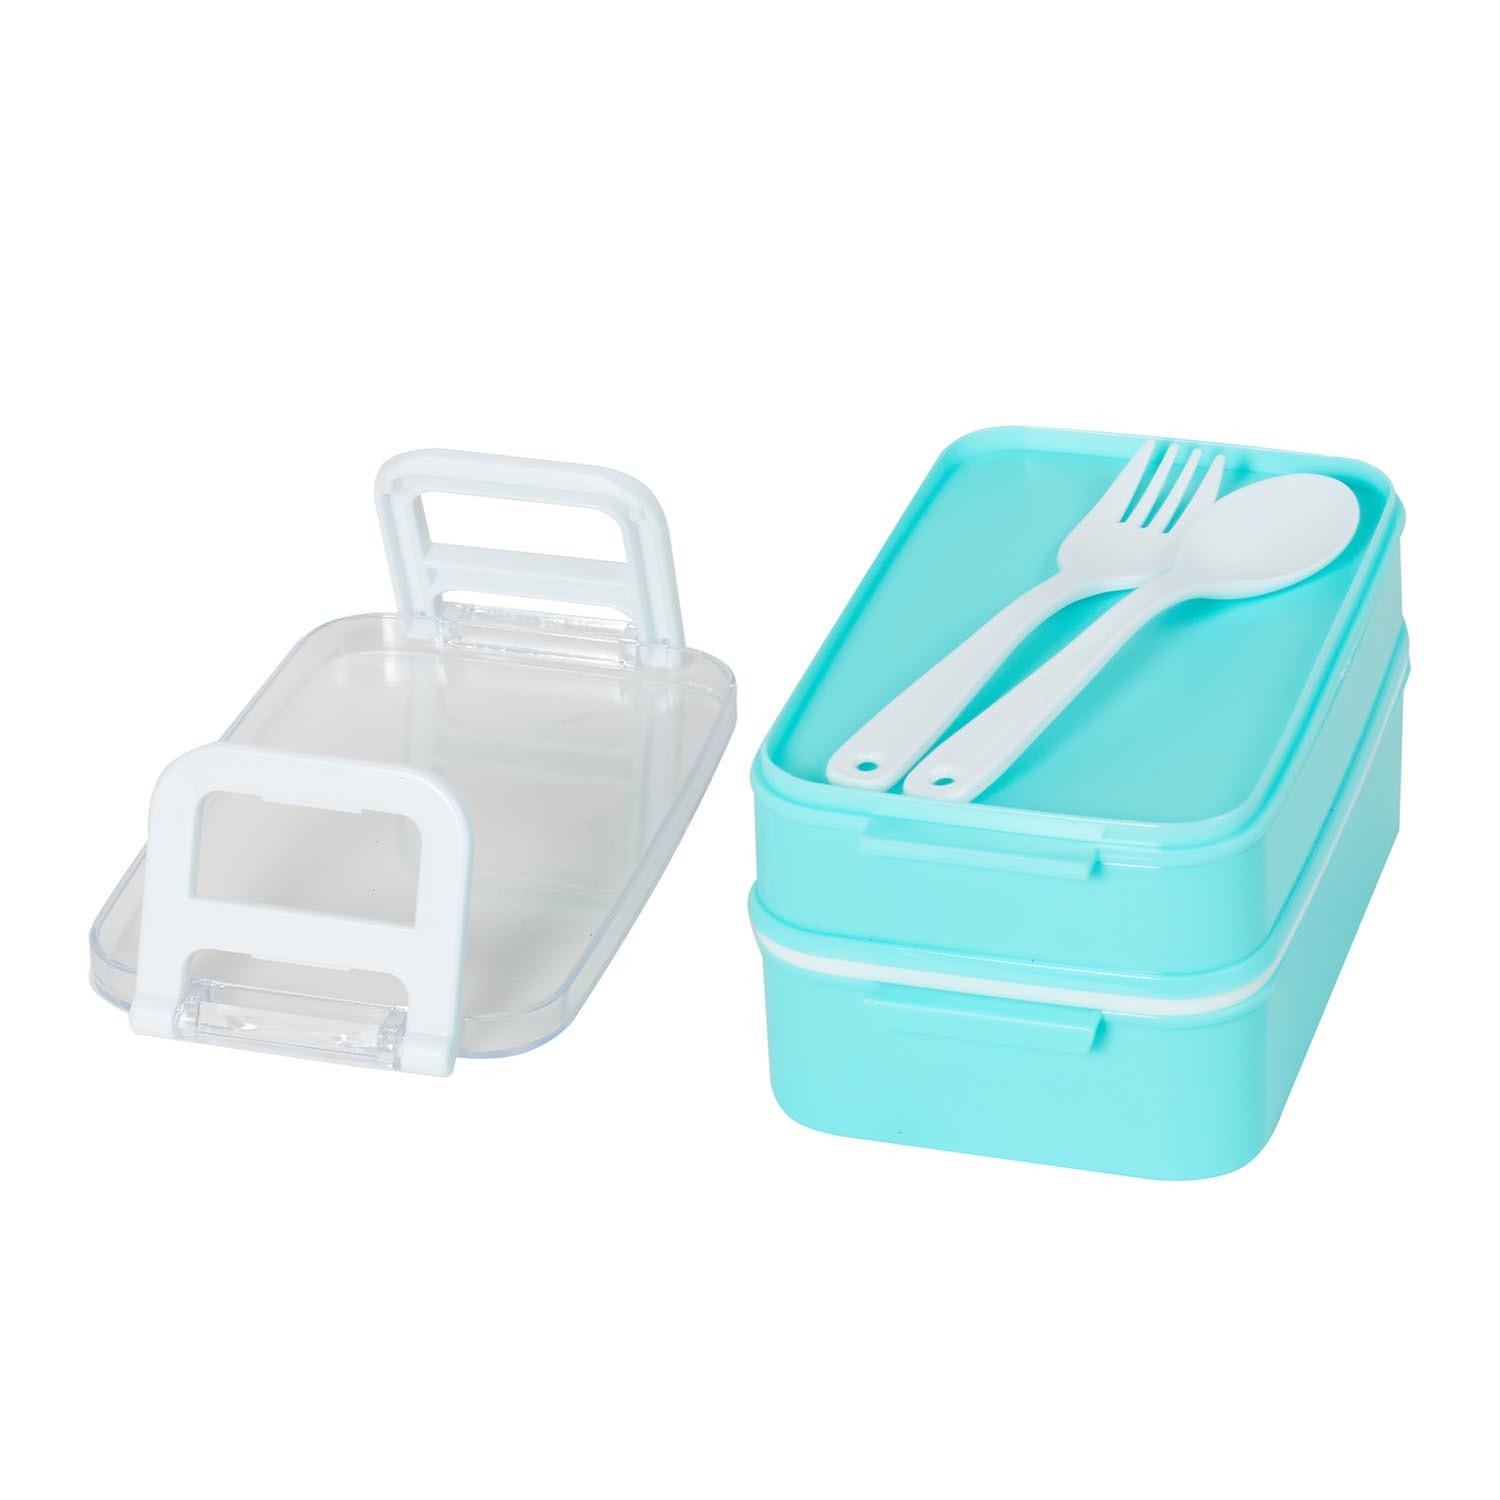 Dual Compartment Lunch Box with Cutlery - Blue Image 3